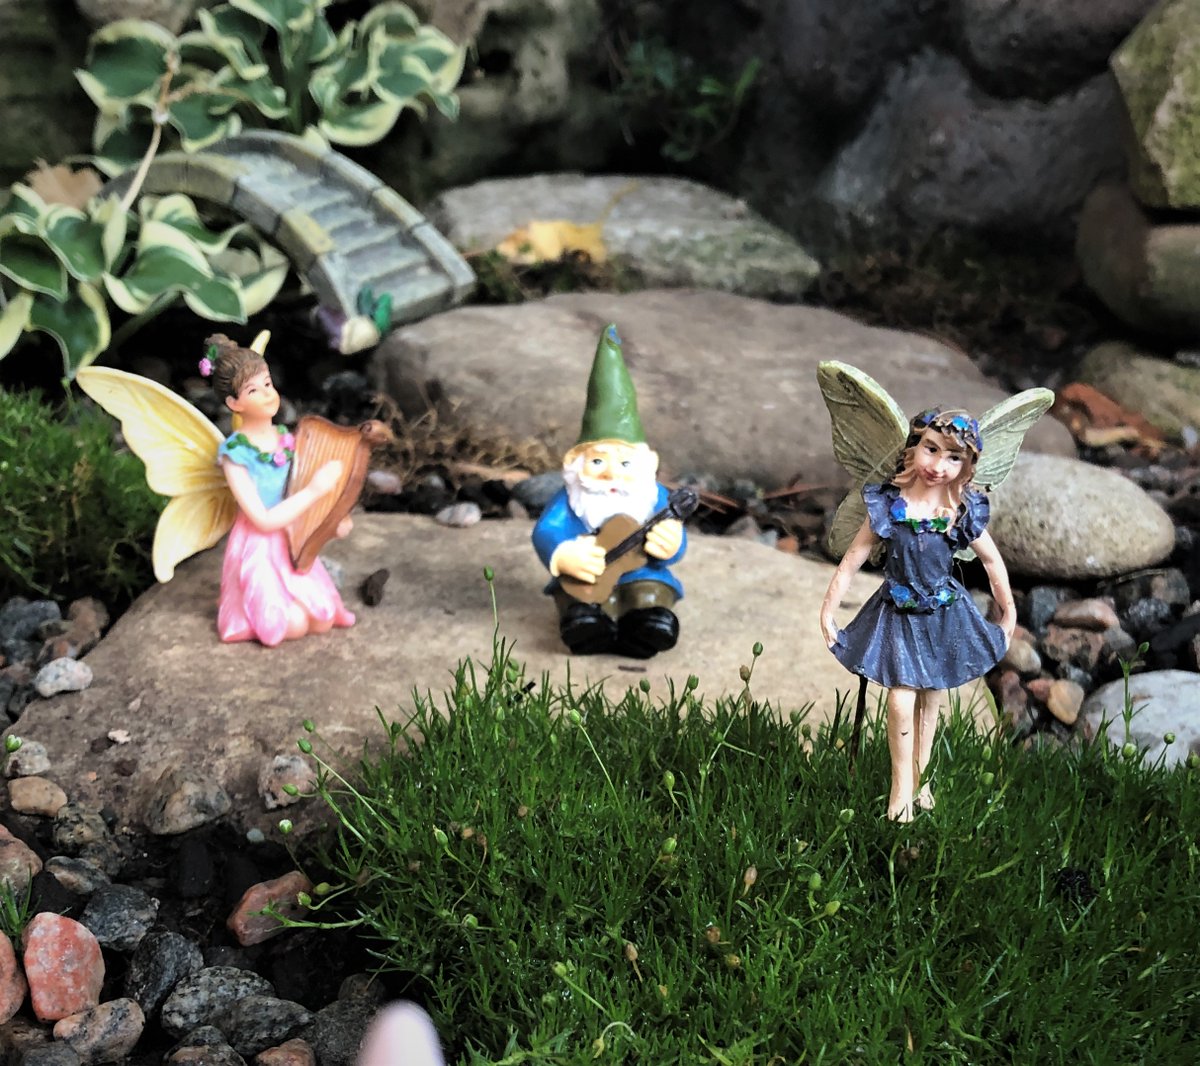 Happy #FairyFriday! Penelope is enjoying dancing on the new Irish Moss while Brigid and Gniven play some dance music.

#Fairy #Gnome #FairyGarden #GnomeGarden #Dance